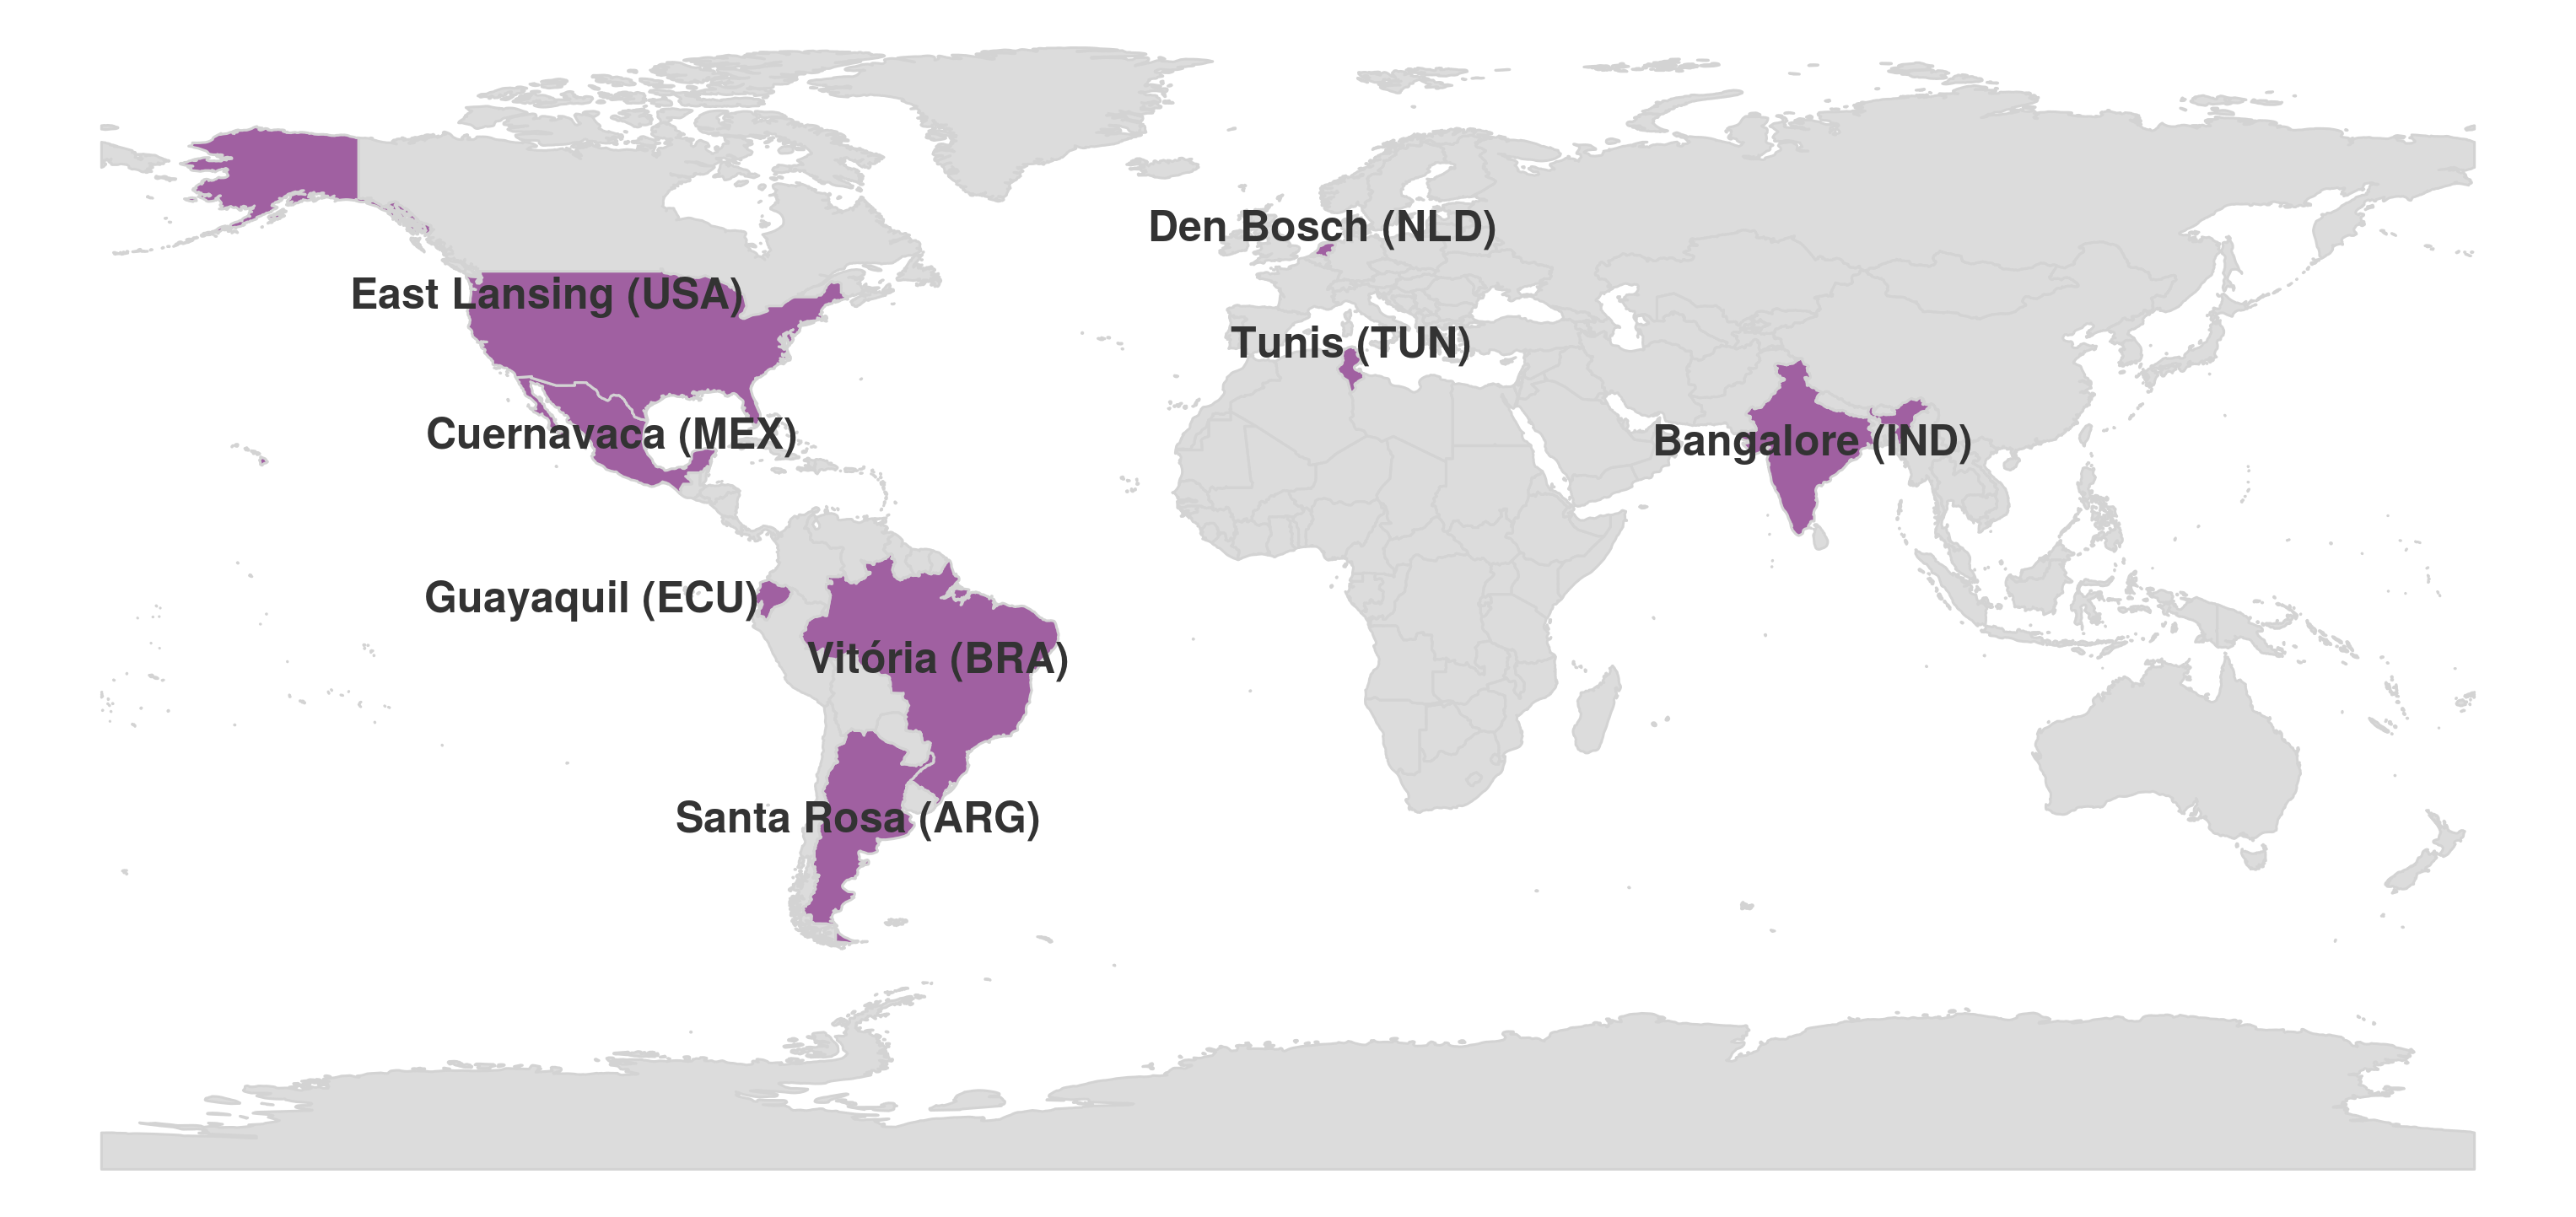 World map indicating the countries (in purple) where each co-host chapter are located: East Lansing (USA), Cuernavaca (MEX), Guayaquil (ECU), Vitória (BRA), Santa Rosa (ARG), Den Bosch (NLD), Tunis (TUN), Bangalore (IND).